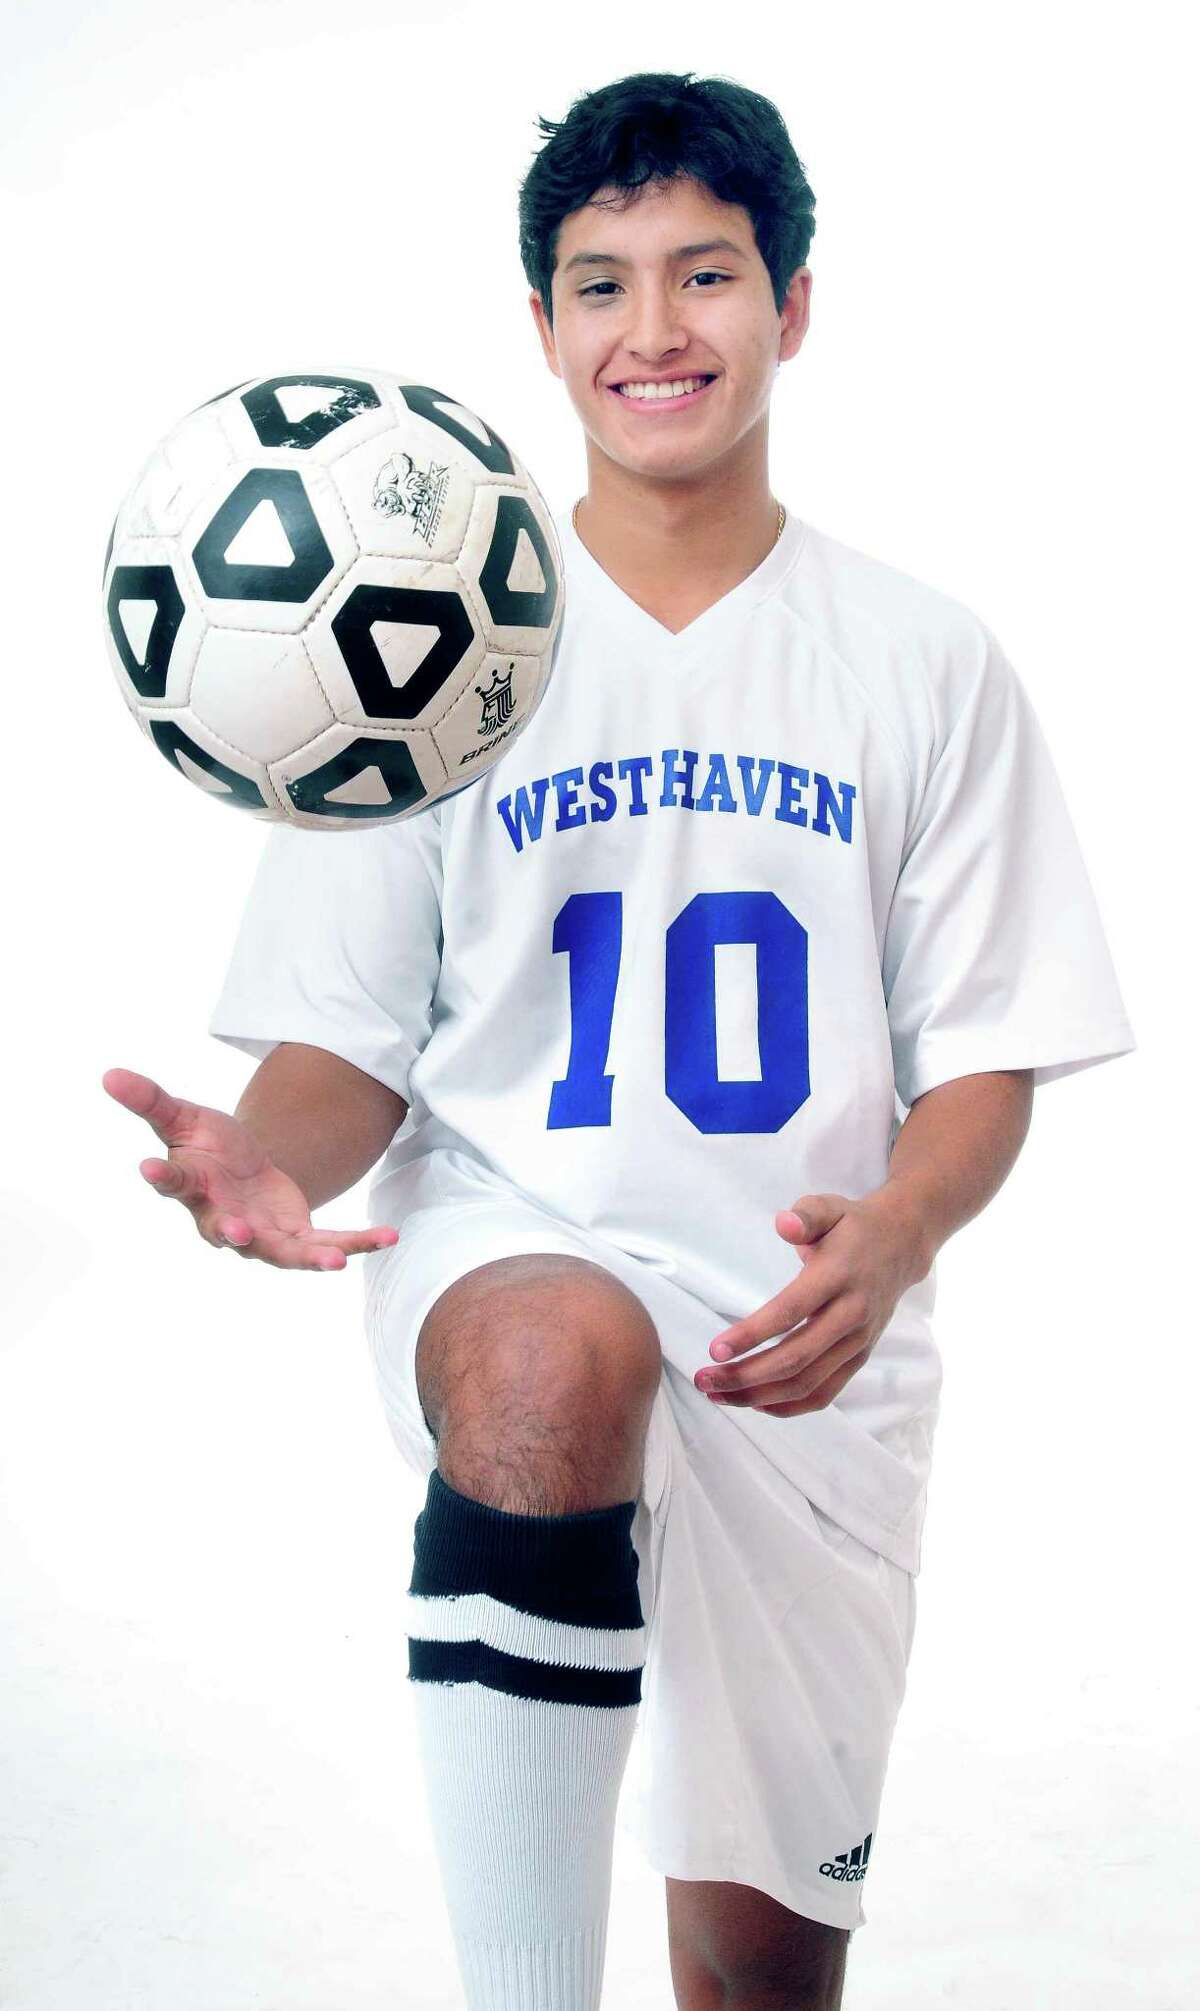 Pablo Perez - MVP West Haven, Sr., M Stats: Had 16 goals and 14 assists for the Westies. Honors: Player of the Year for the Southern Connecticut Conference and the Greater New Haven Soccer Officials Association. Off the field: Peer advocate. Up next: Unsure of college soccer plans, but intends to major in civil engineering wherever he goes.